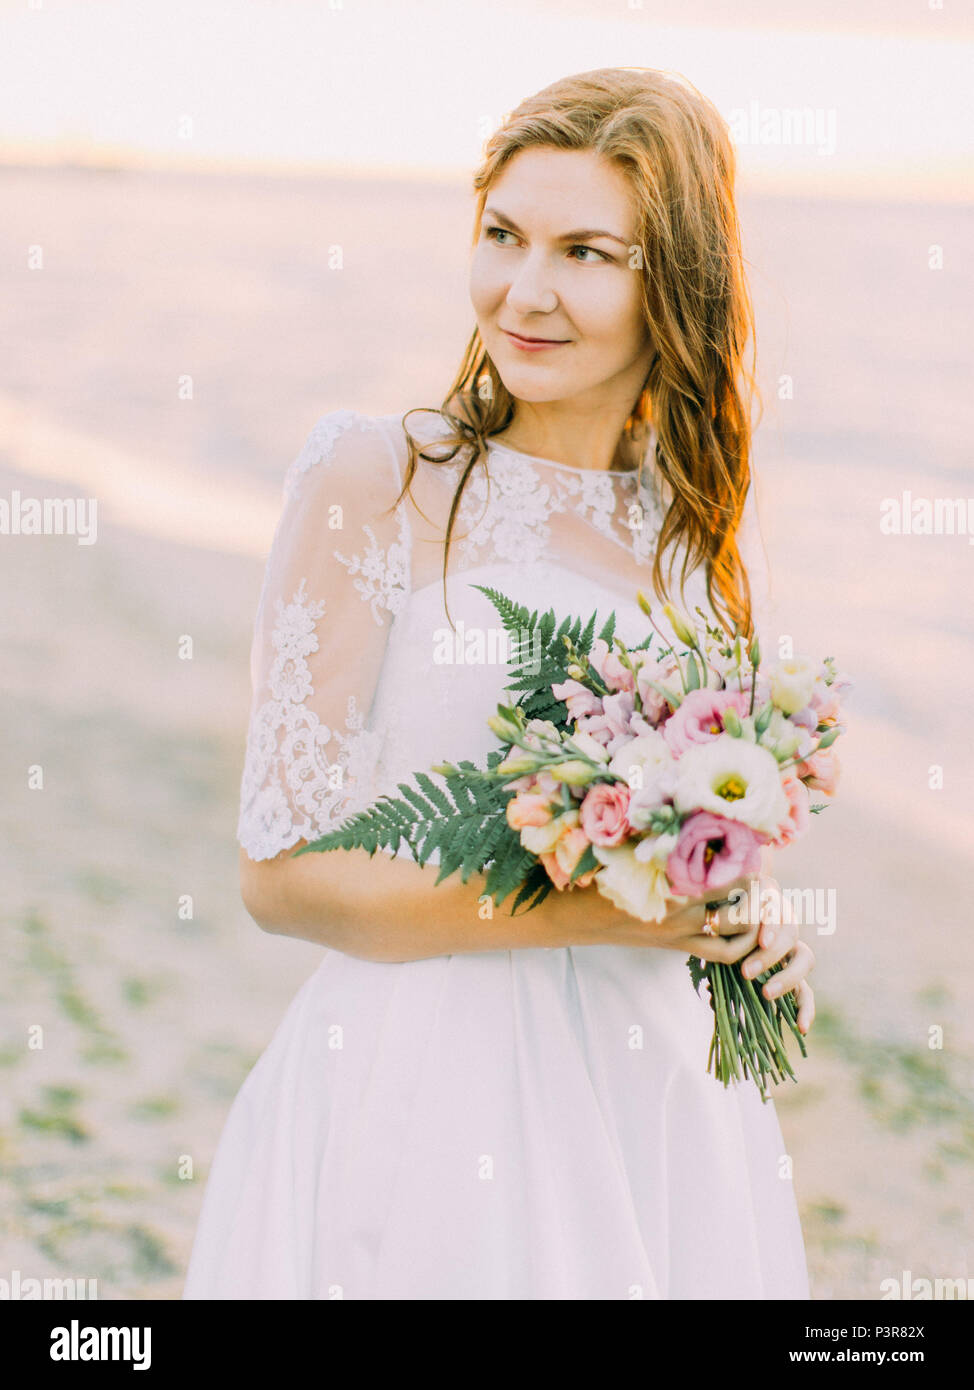 The portrait of the bride with the bouquet looking at the right side. The sunset composition. Stock Photo